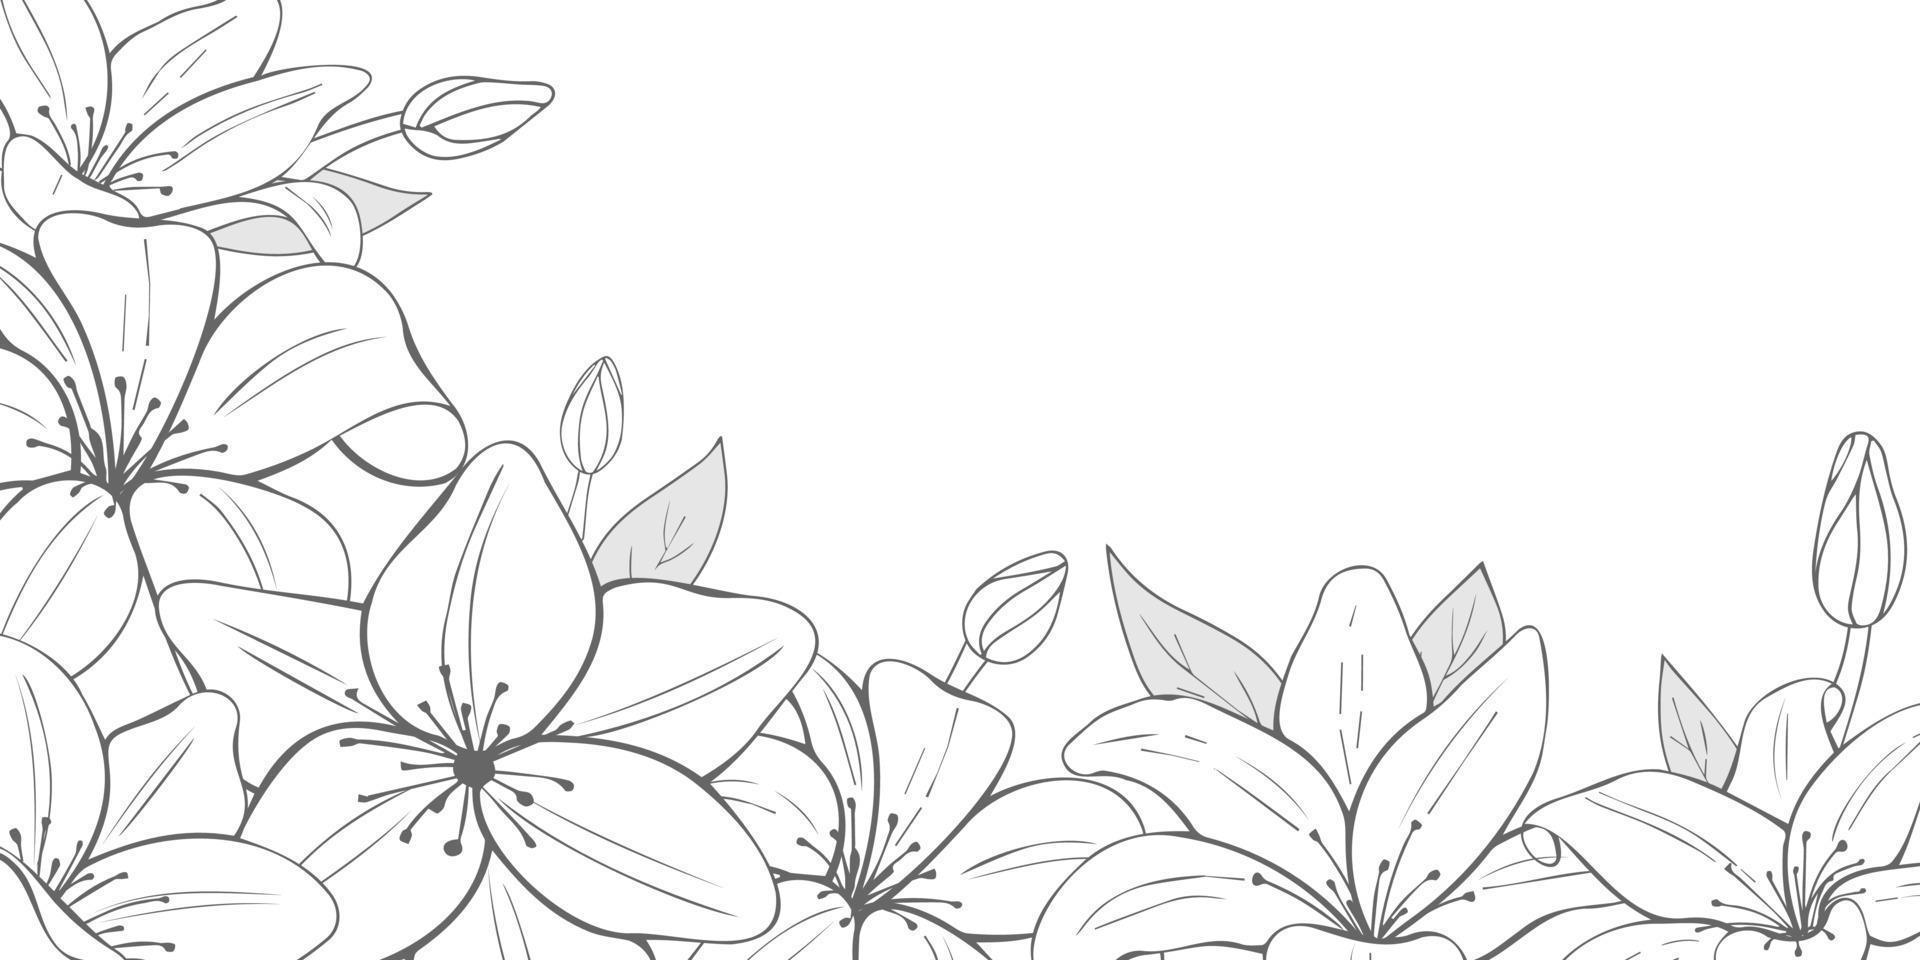 Monochrome flowers on white background. Hand drawn lilies. Horizontal flyer. Vector illustration. Black and white.